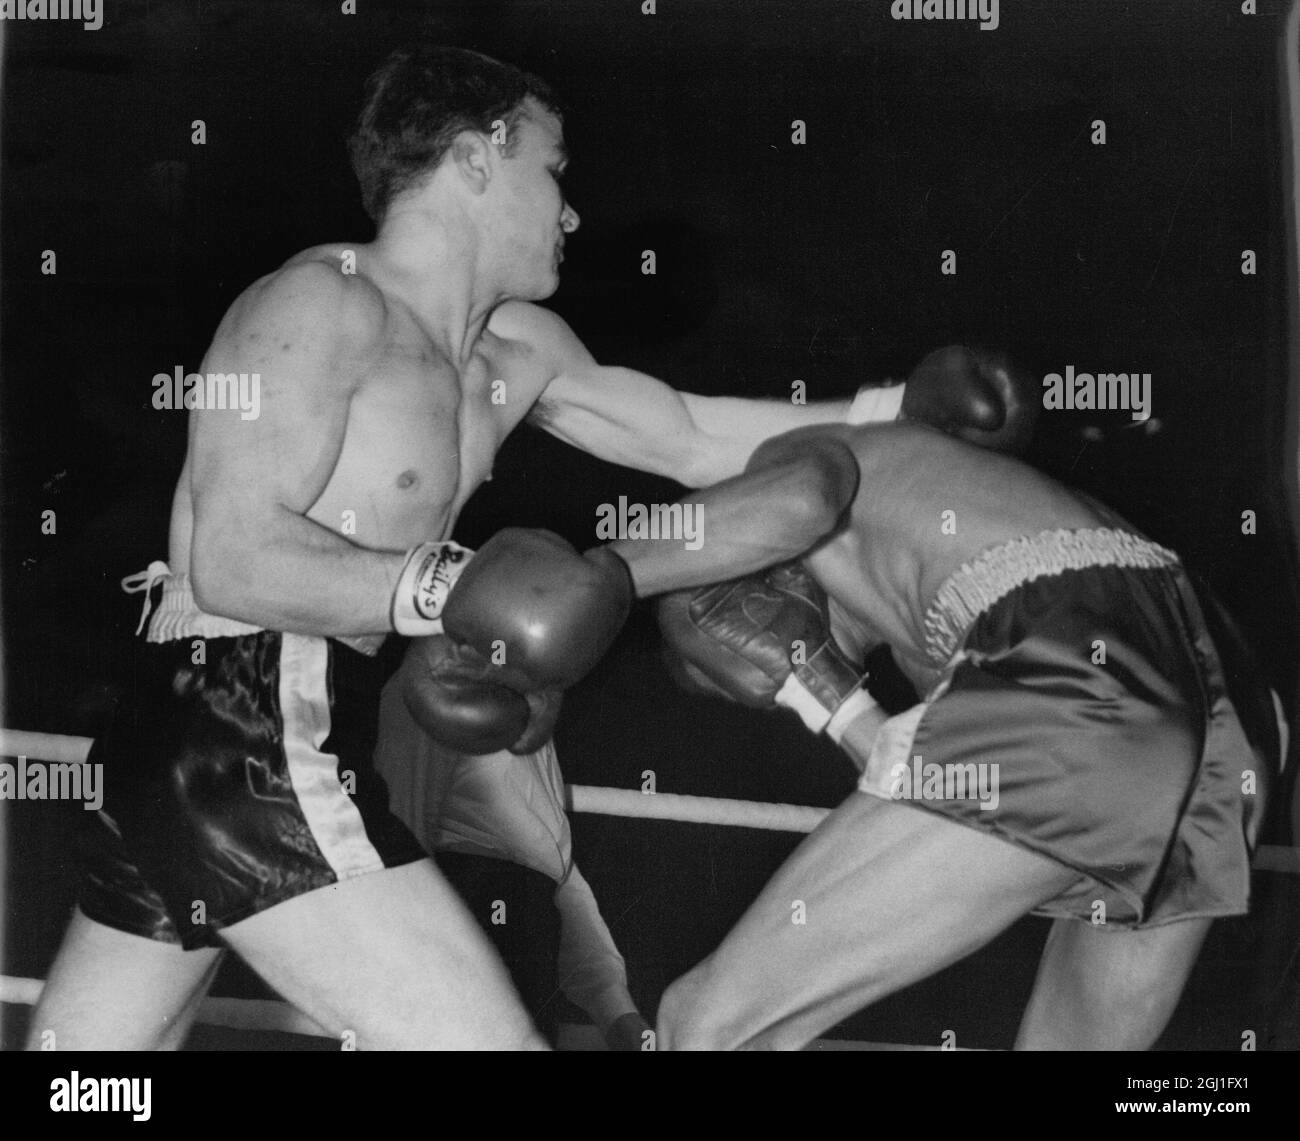 Don Jordan of California ducks beneath a left from British lightweight champion Dave Charnley during their 10 round contest at Harringay , London . Charnley won on points . 28th January . 1958 Stock Photo